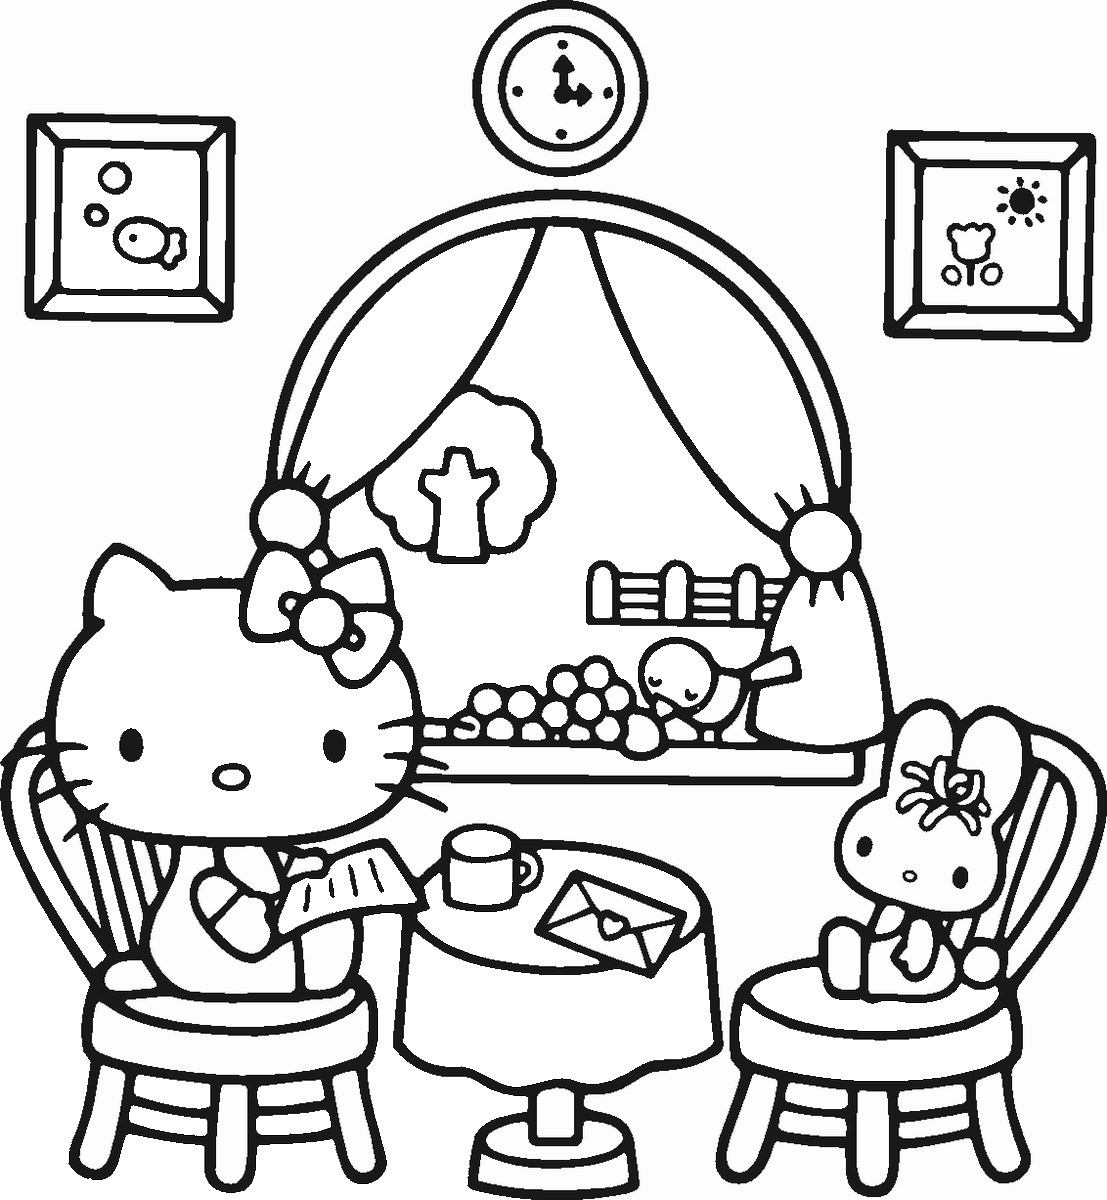 Hello Kitty Coloring Pages Cartoons hello_kitty_cl28 Printable 2020 3162 Coloring4free